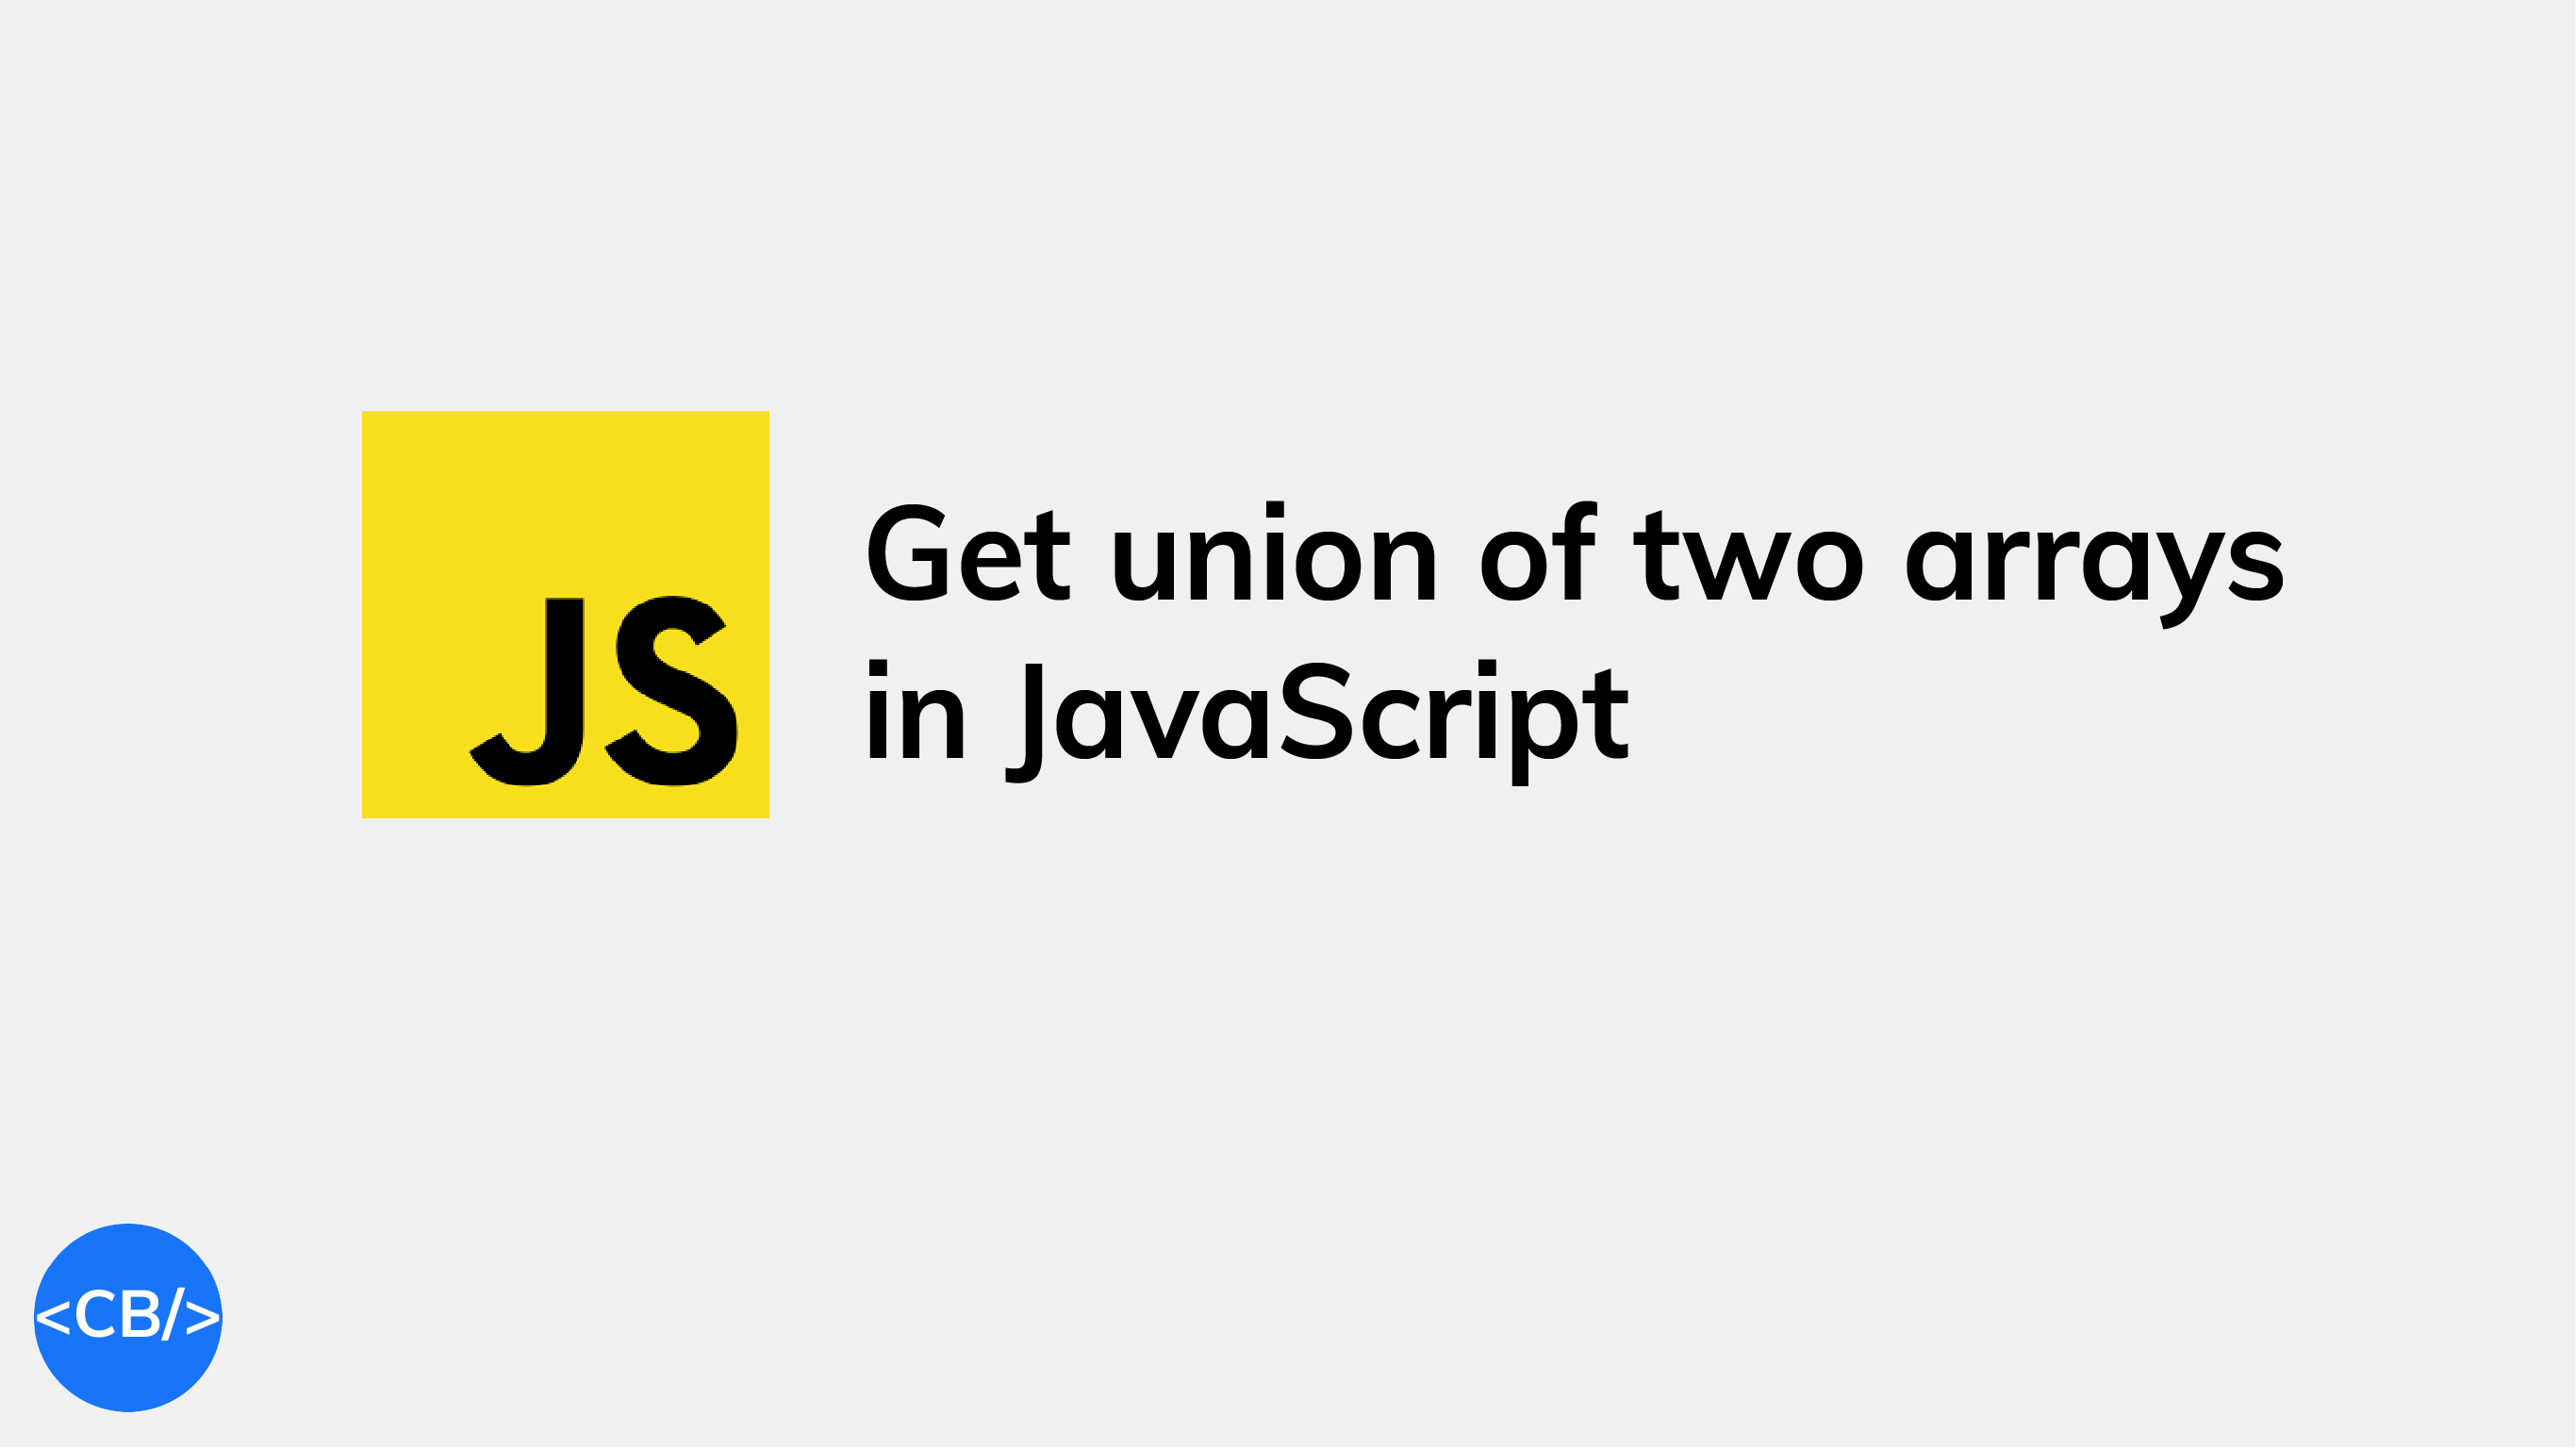 How to quickly get the union of two arrays in JavaScript